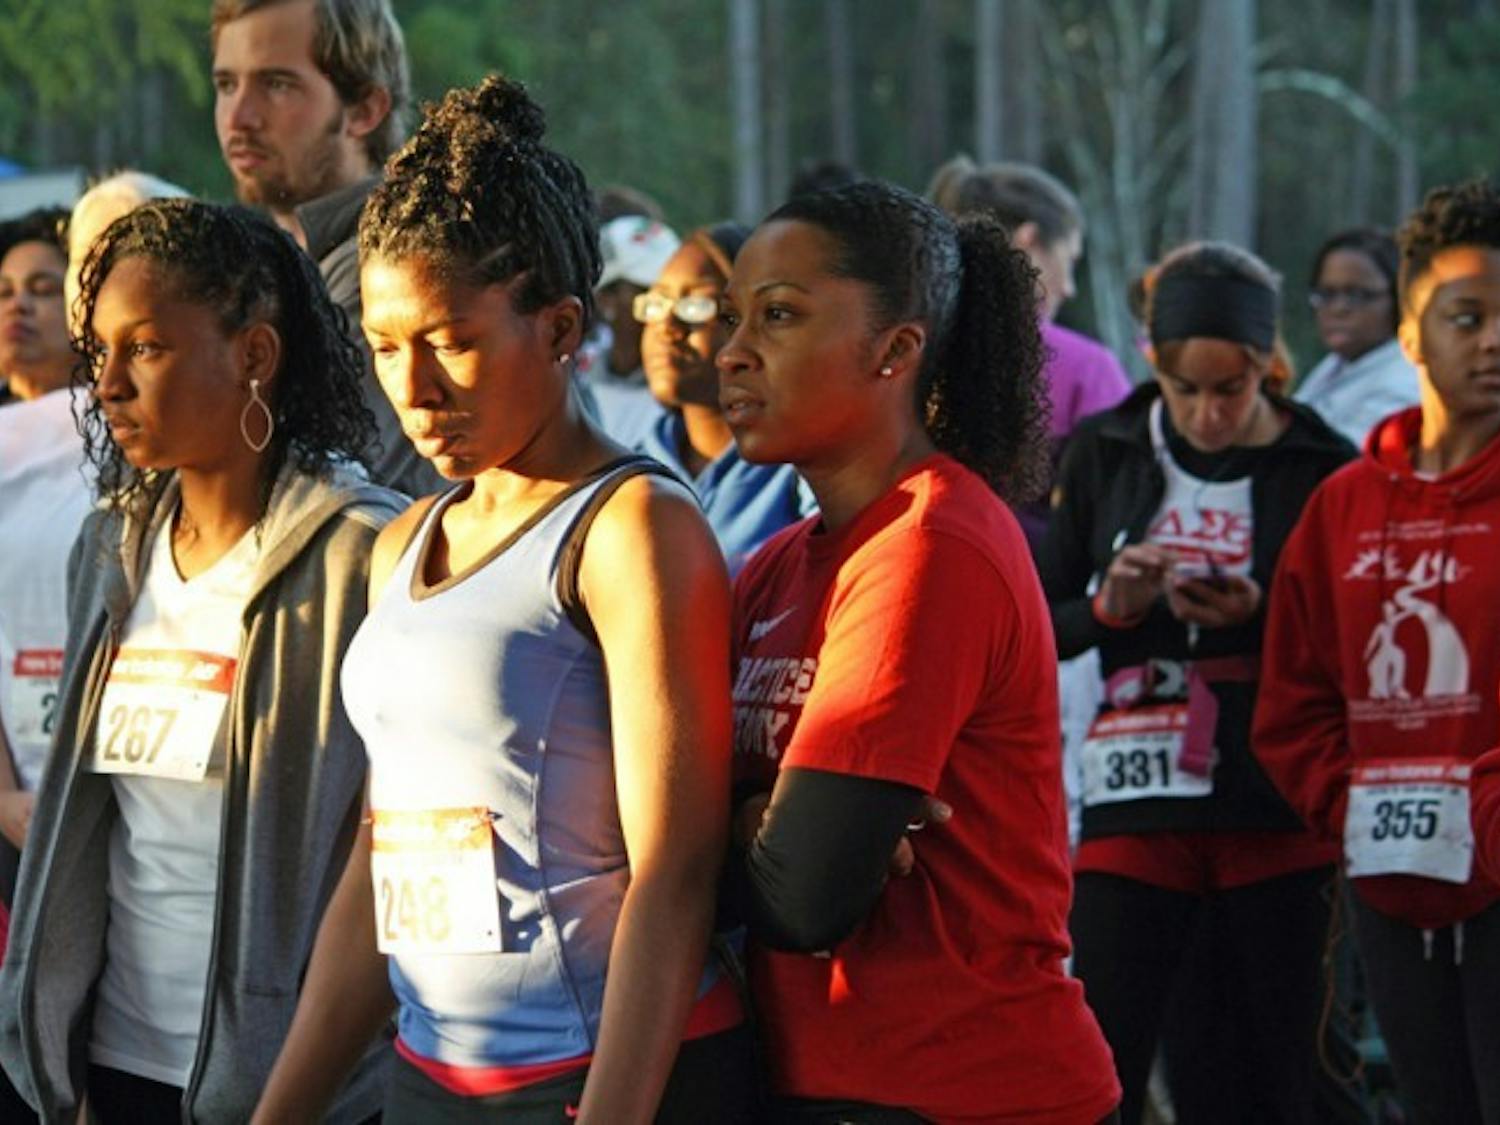 The Gainesville Alumnae Chapter of Delta Sigma Theta Sorority, Inc. hosts the Listen to Your Heart 5K Run/Walk on Saturday morning to support the American Heart Association's Go Red for Women program.